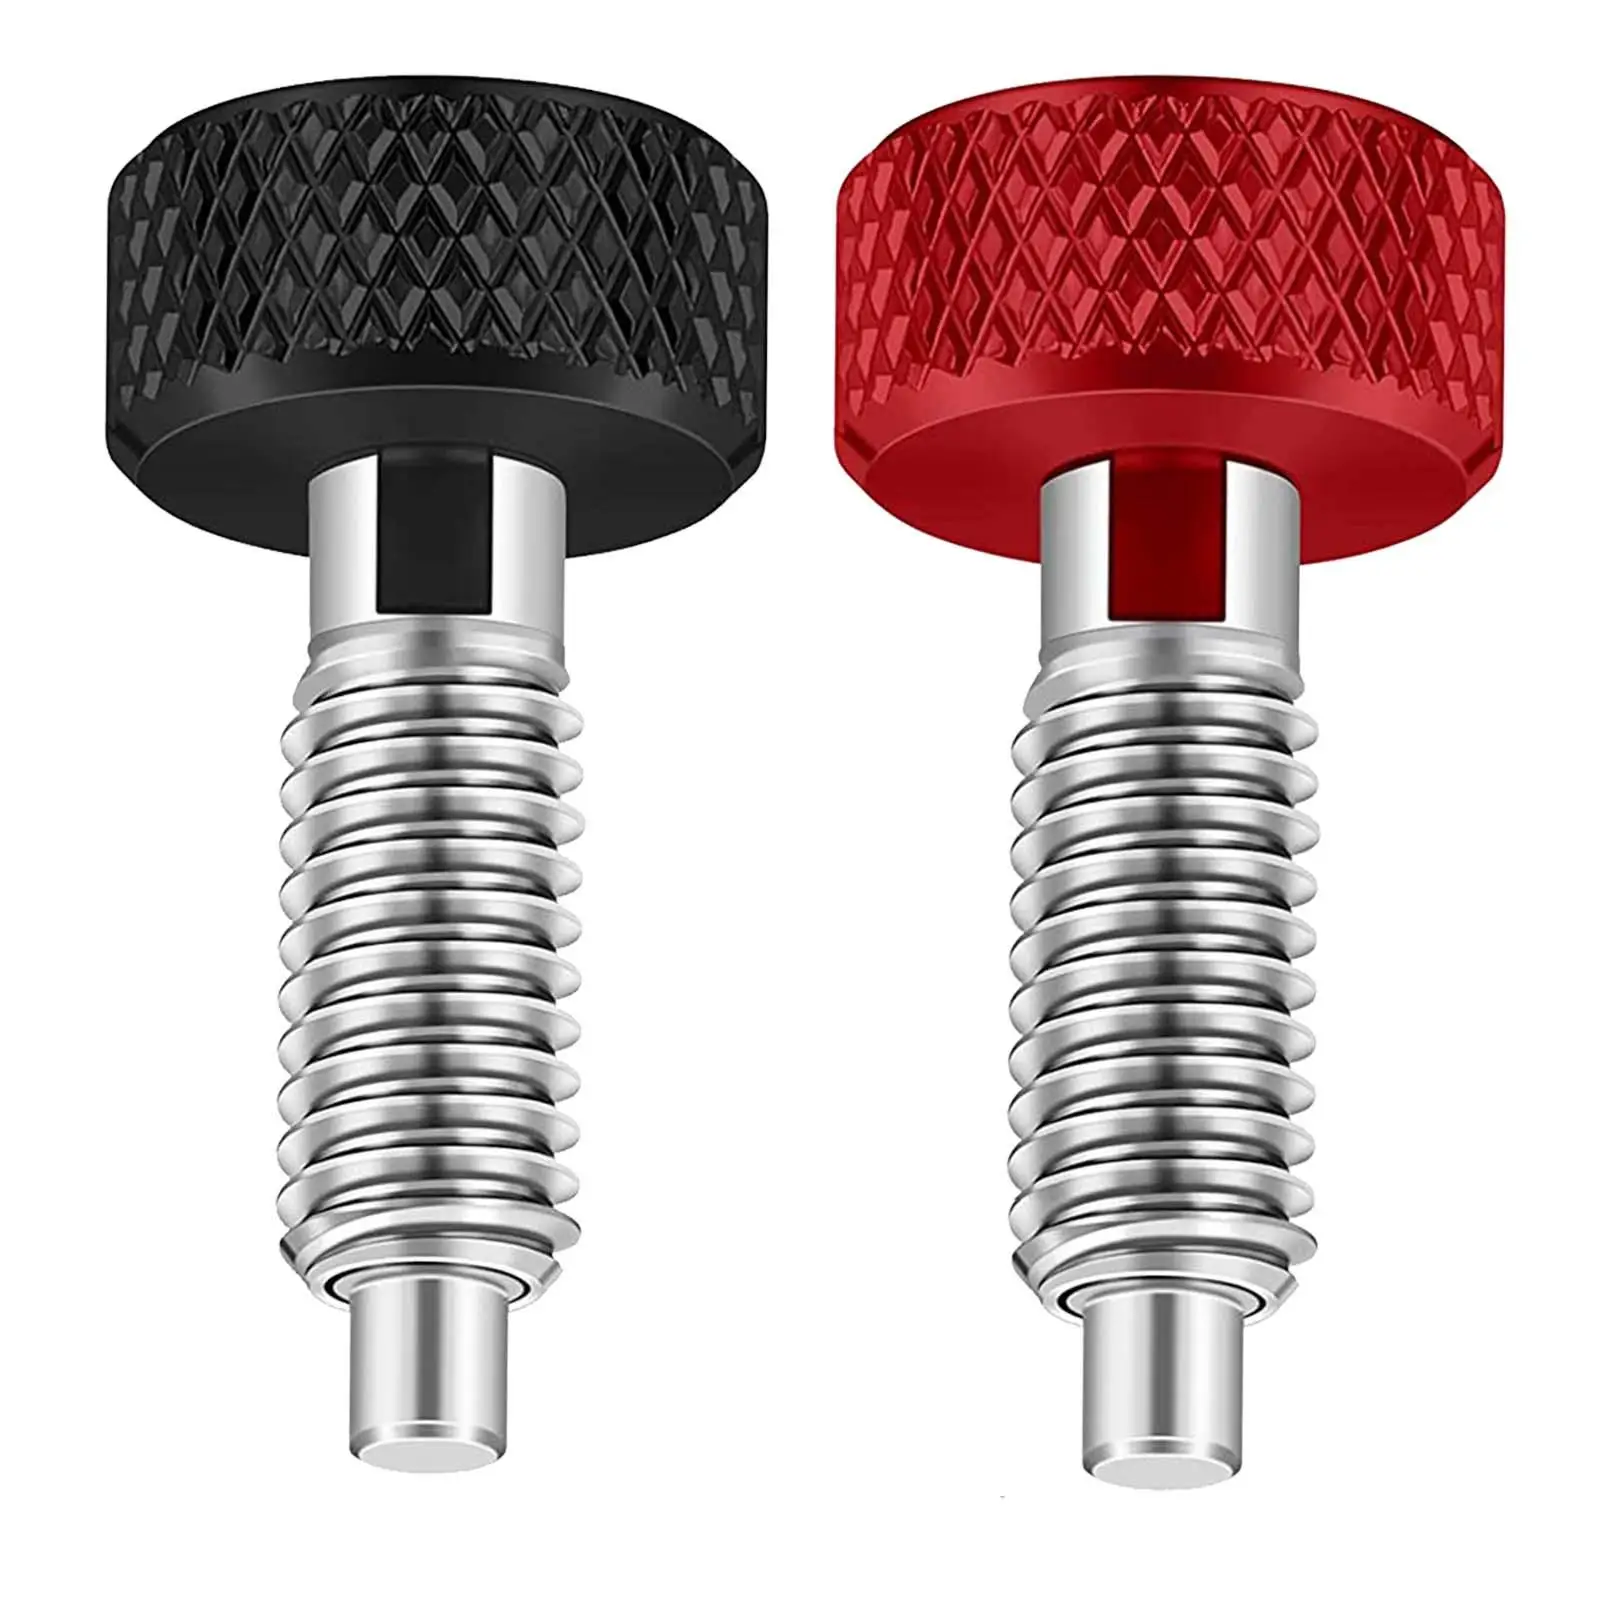 Retractable Plunger with Knurled Handle Lightweight Sturdy M6 Quick Release Pins for Engine Rooms Rolling Tool Boxes Automobiles